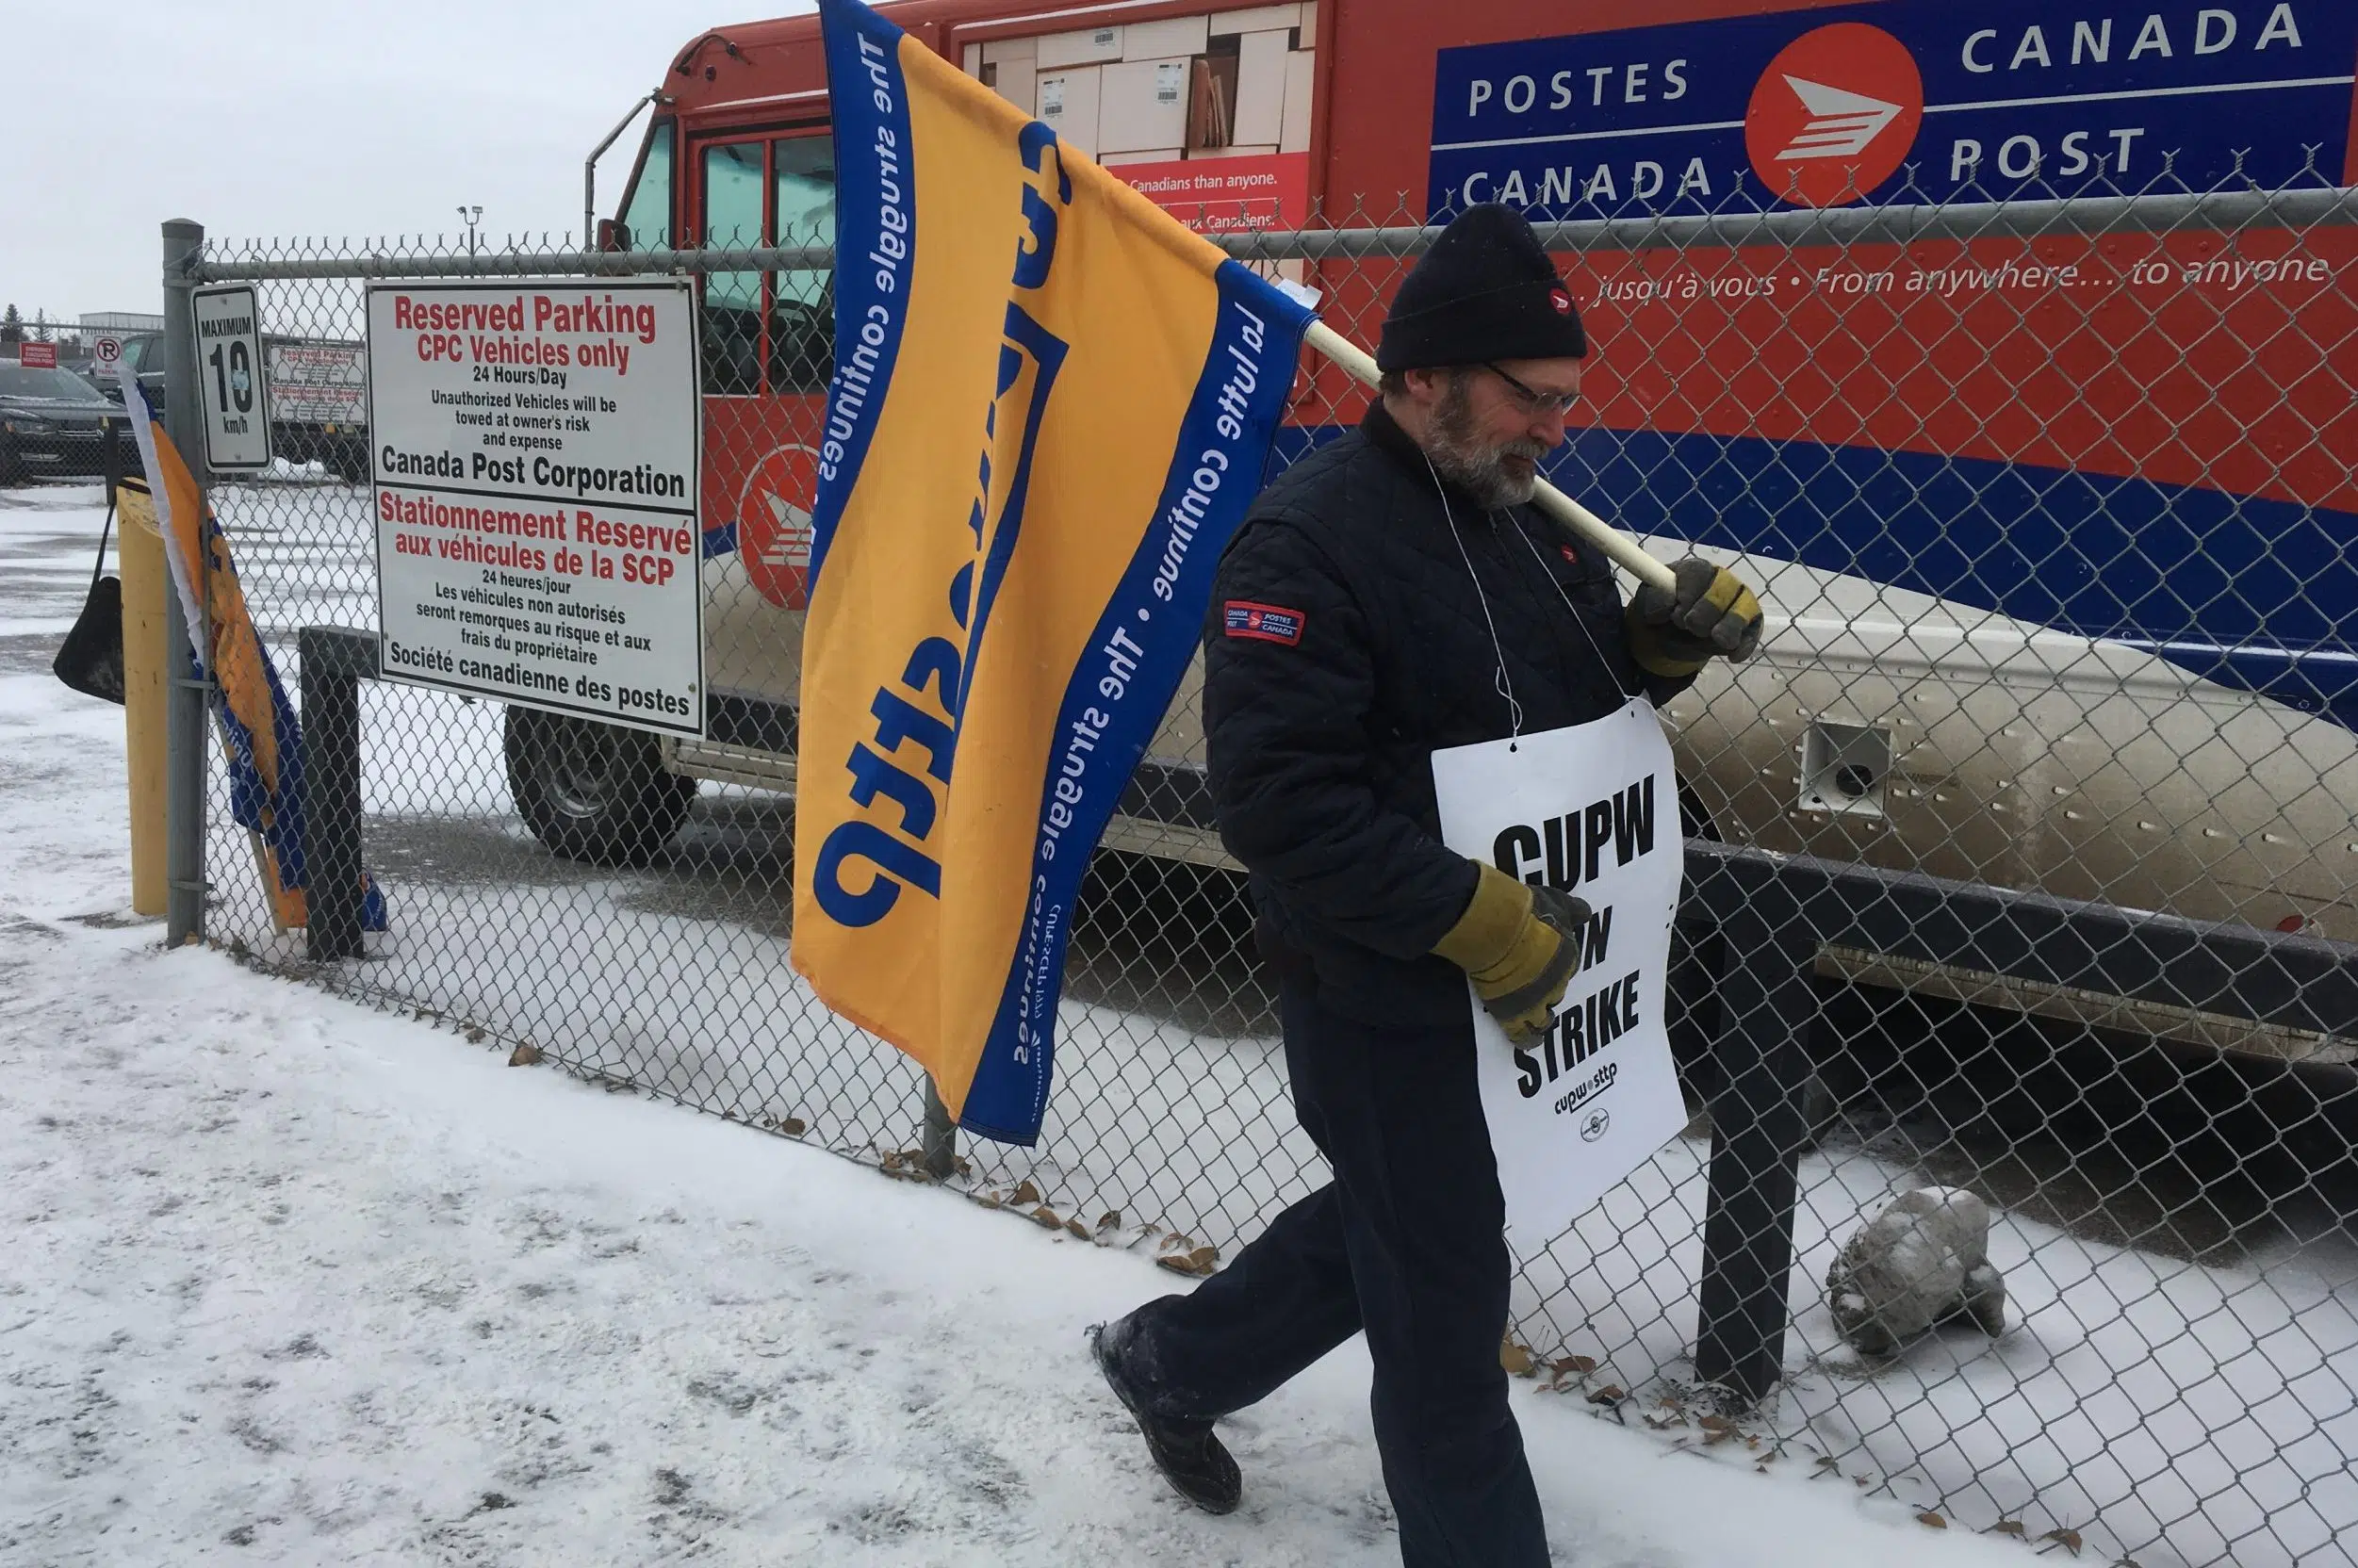 Postal workers stage protest before going back to work